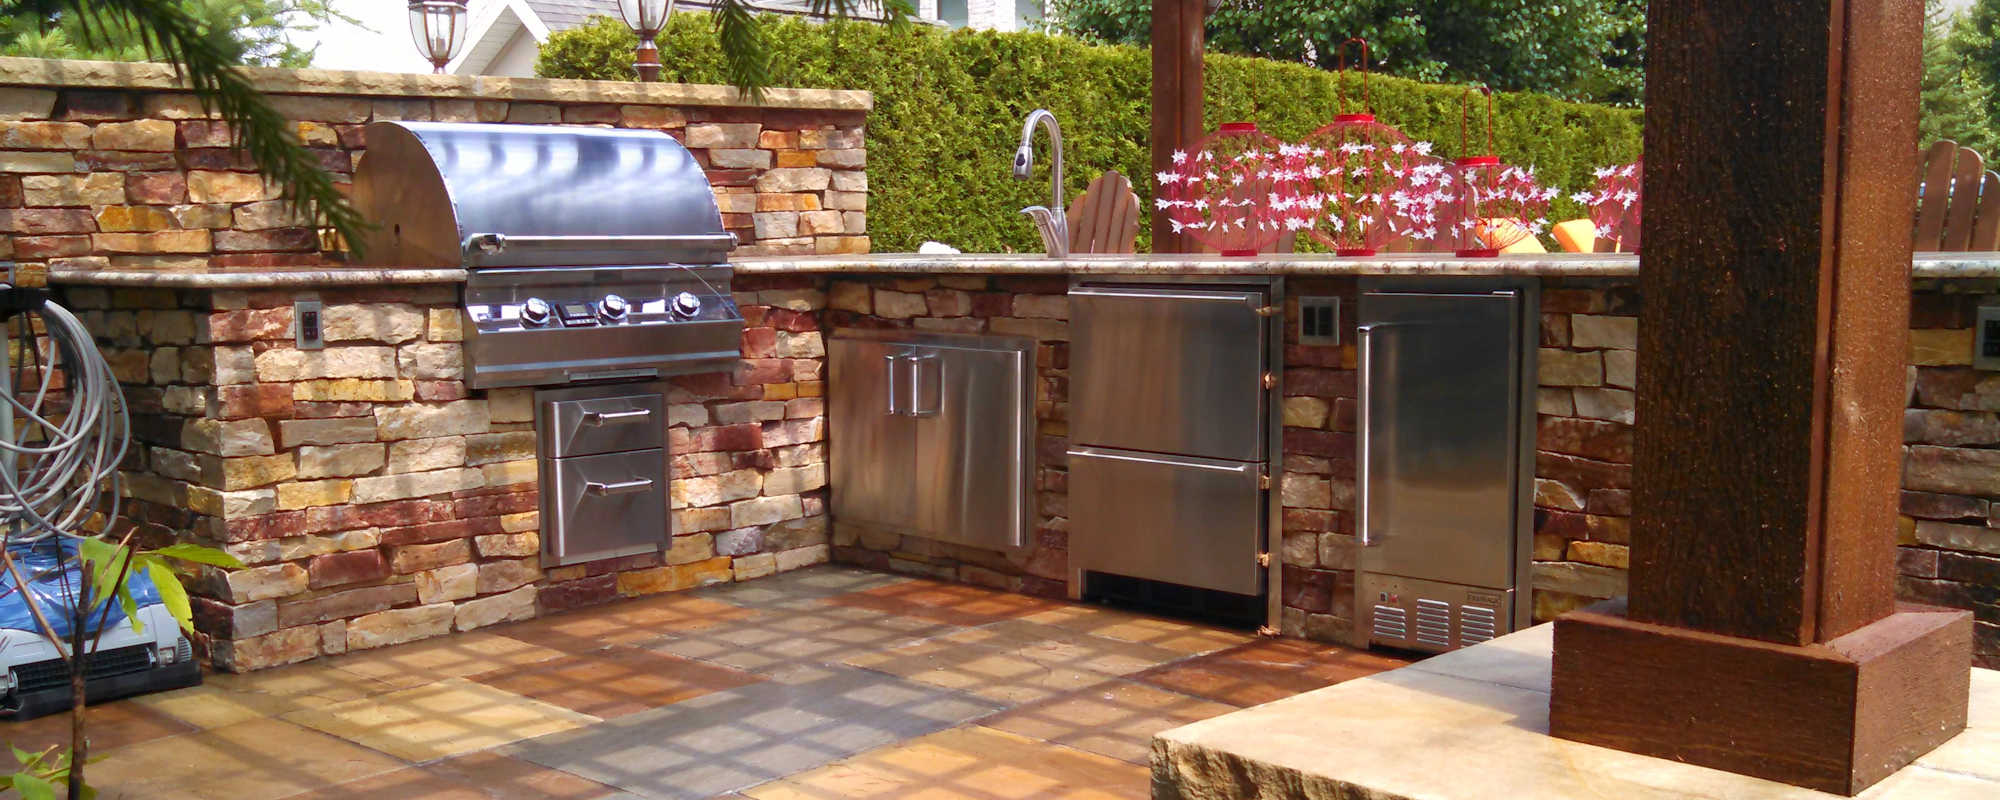 McMarrell's Outdoor Kitchens 